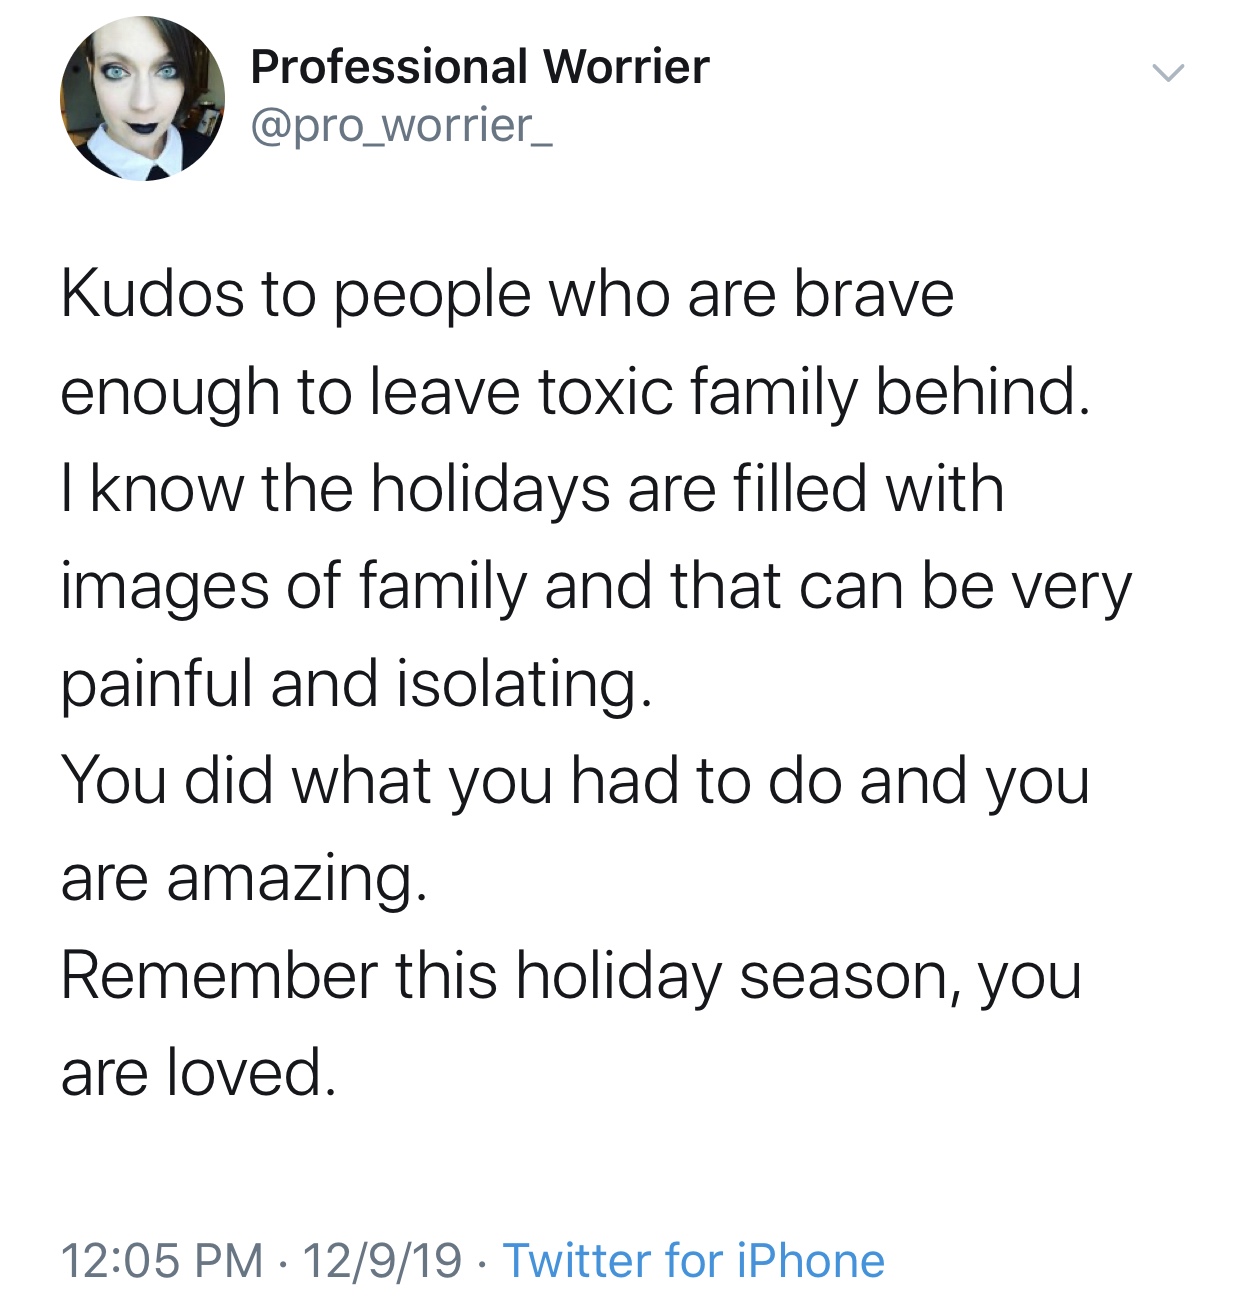 angle - Professional Worrier Kudos to people who are brave enough to leave toxic family behind. I know the holidays are filled with images of family and that can be very painful and isolating. You did what you had to do and you are amazing. Remember this 